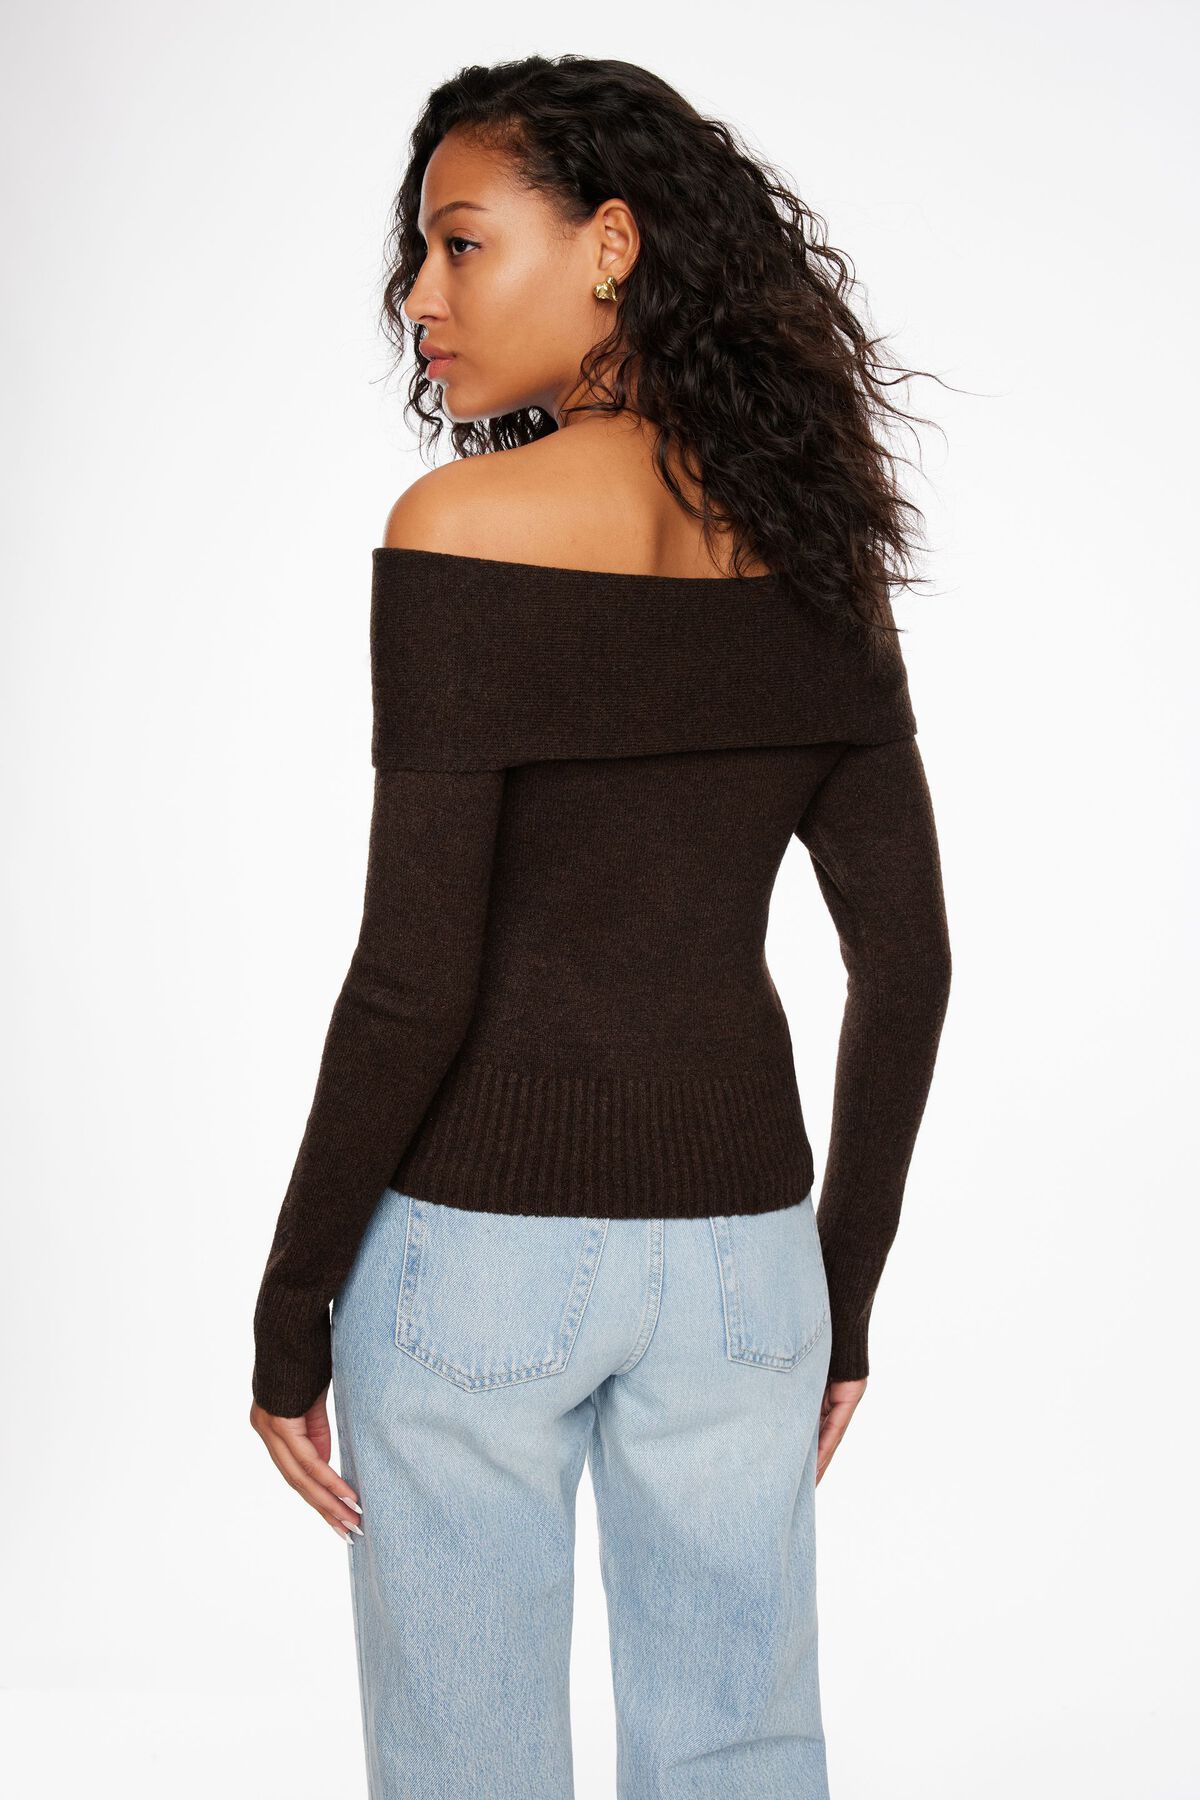 Brown Suede Leggings + Chunky Knitwear - The Charming Detroiter